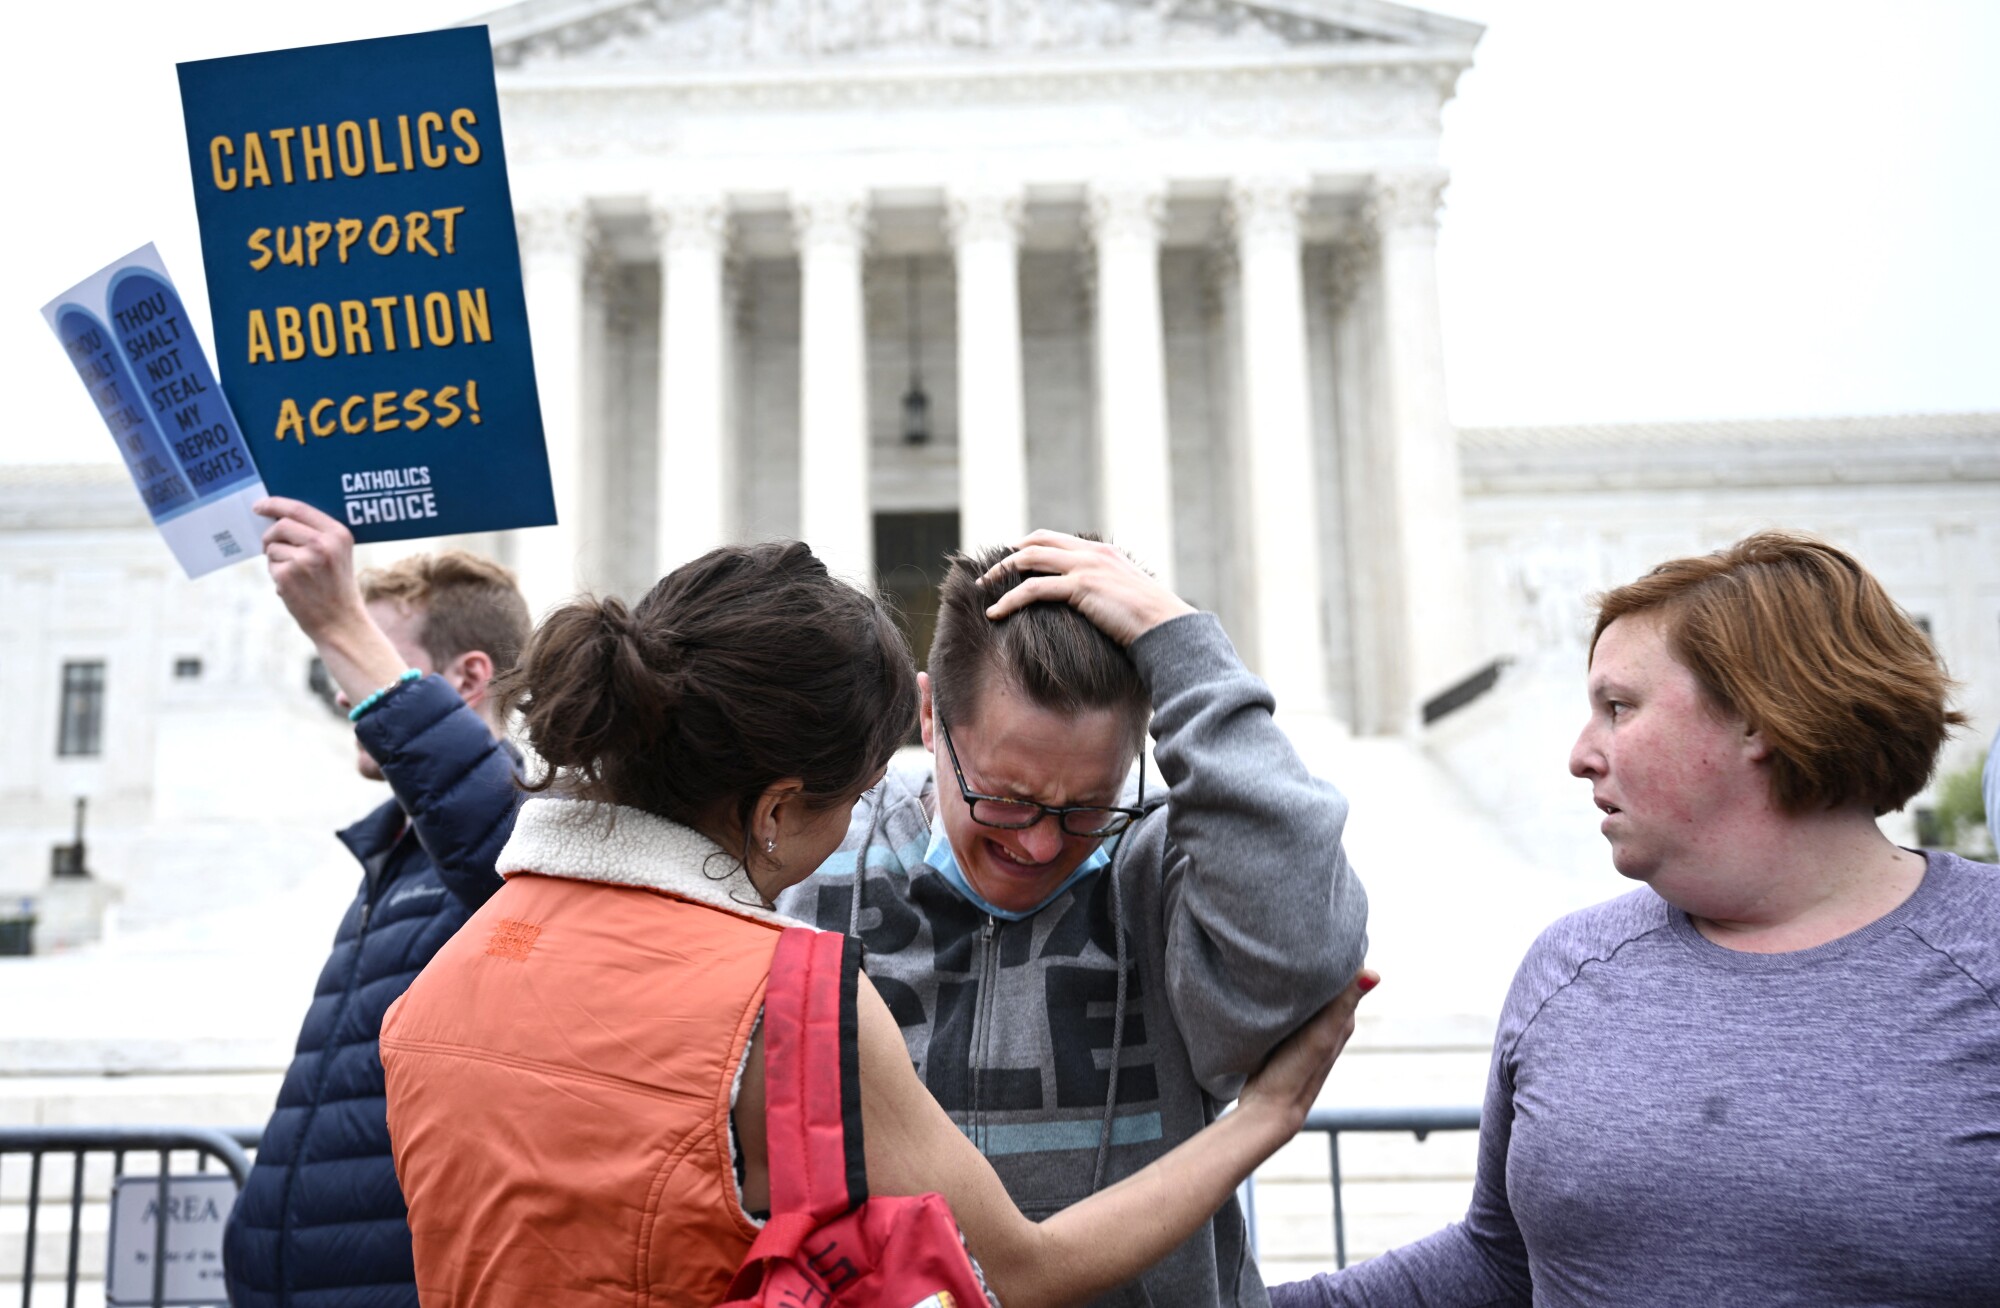 Jessica Golibart, center, cries as anti-abortion demonstrators gather in front of the US Supreme Court in Washington